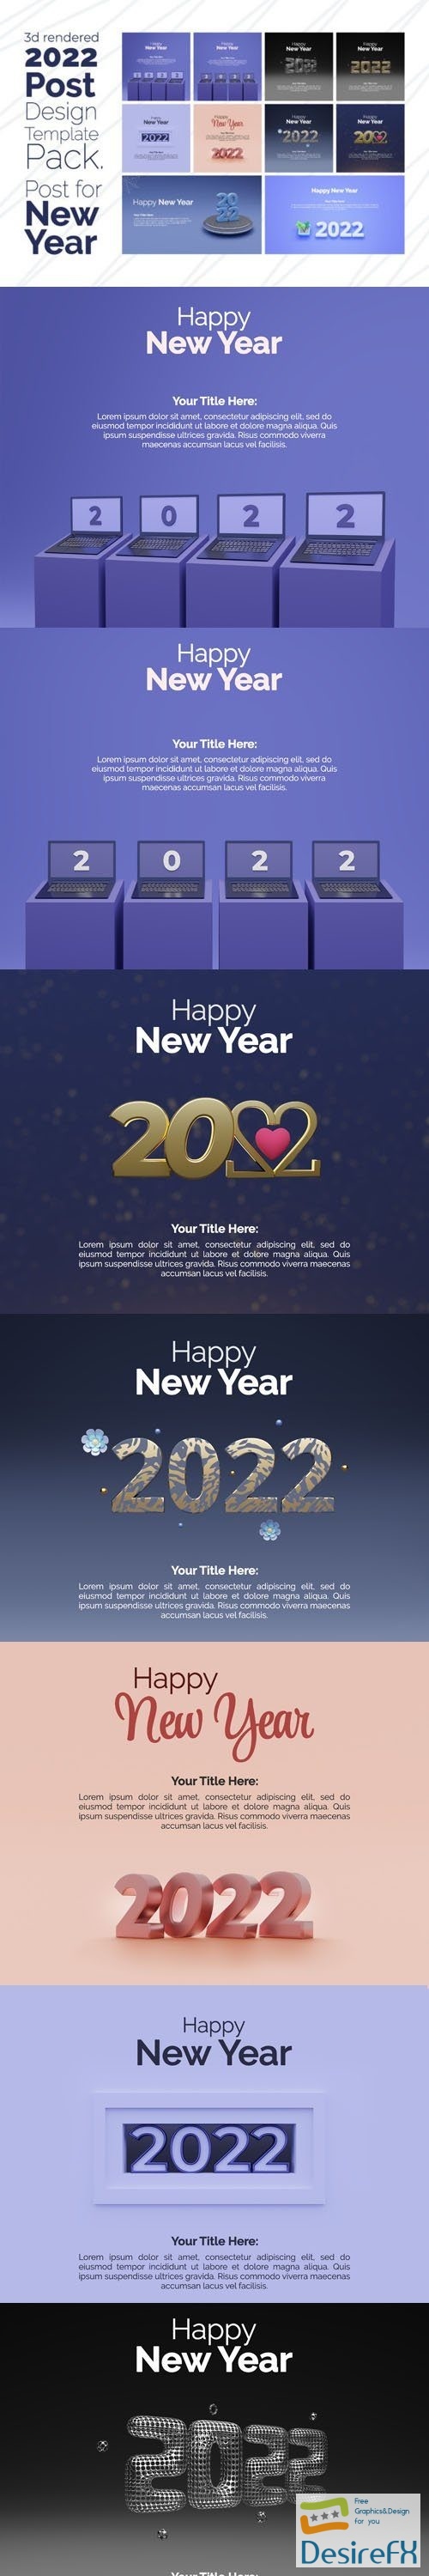 3D Rendered - 2022 Post Design PSD Templates Pack for New Year